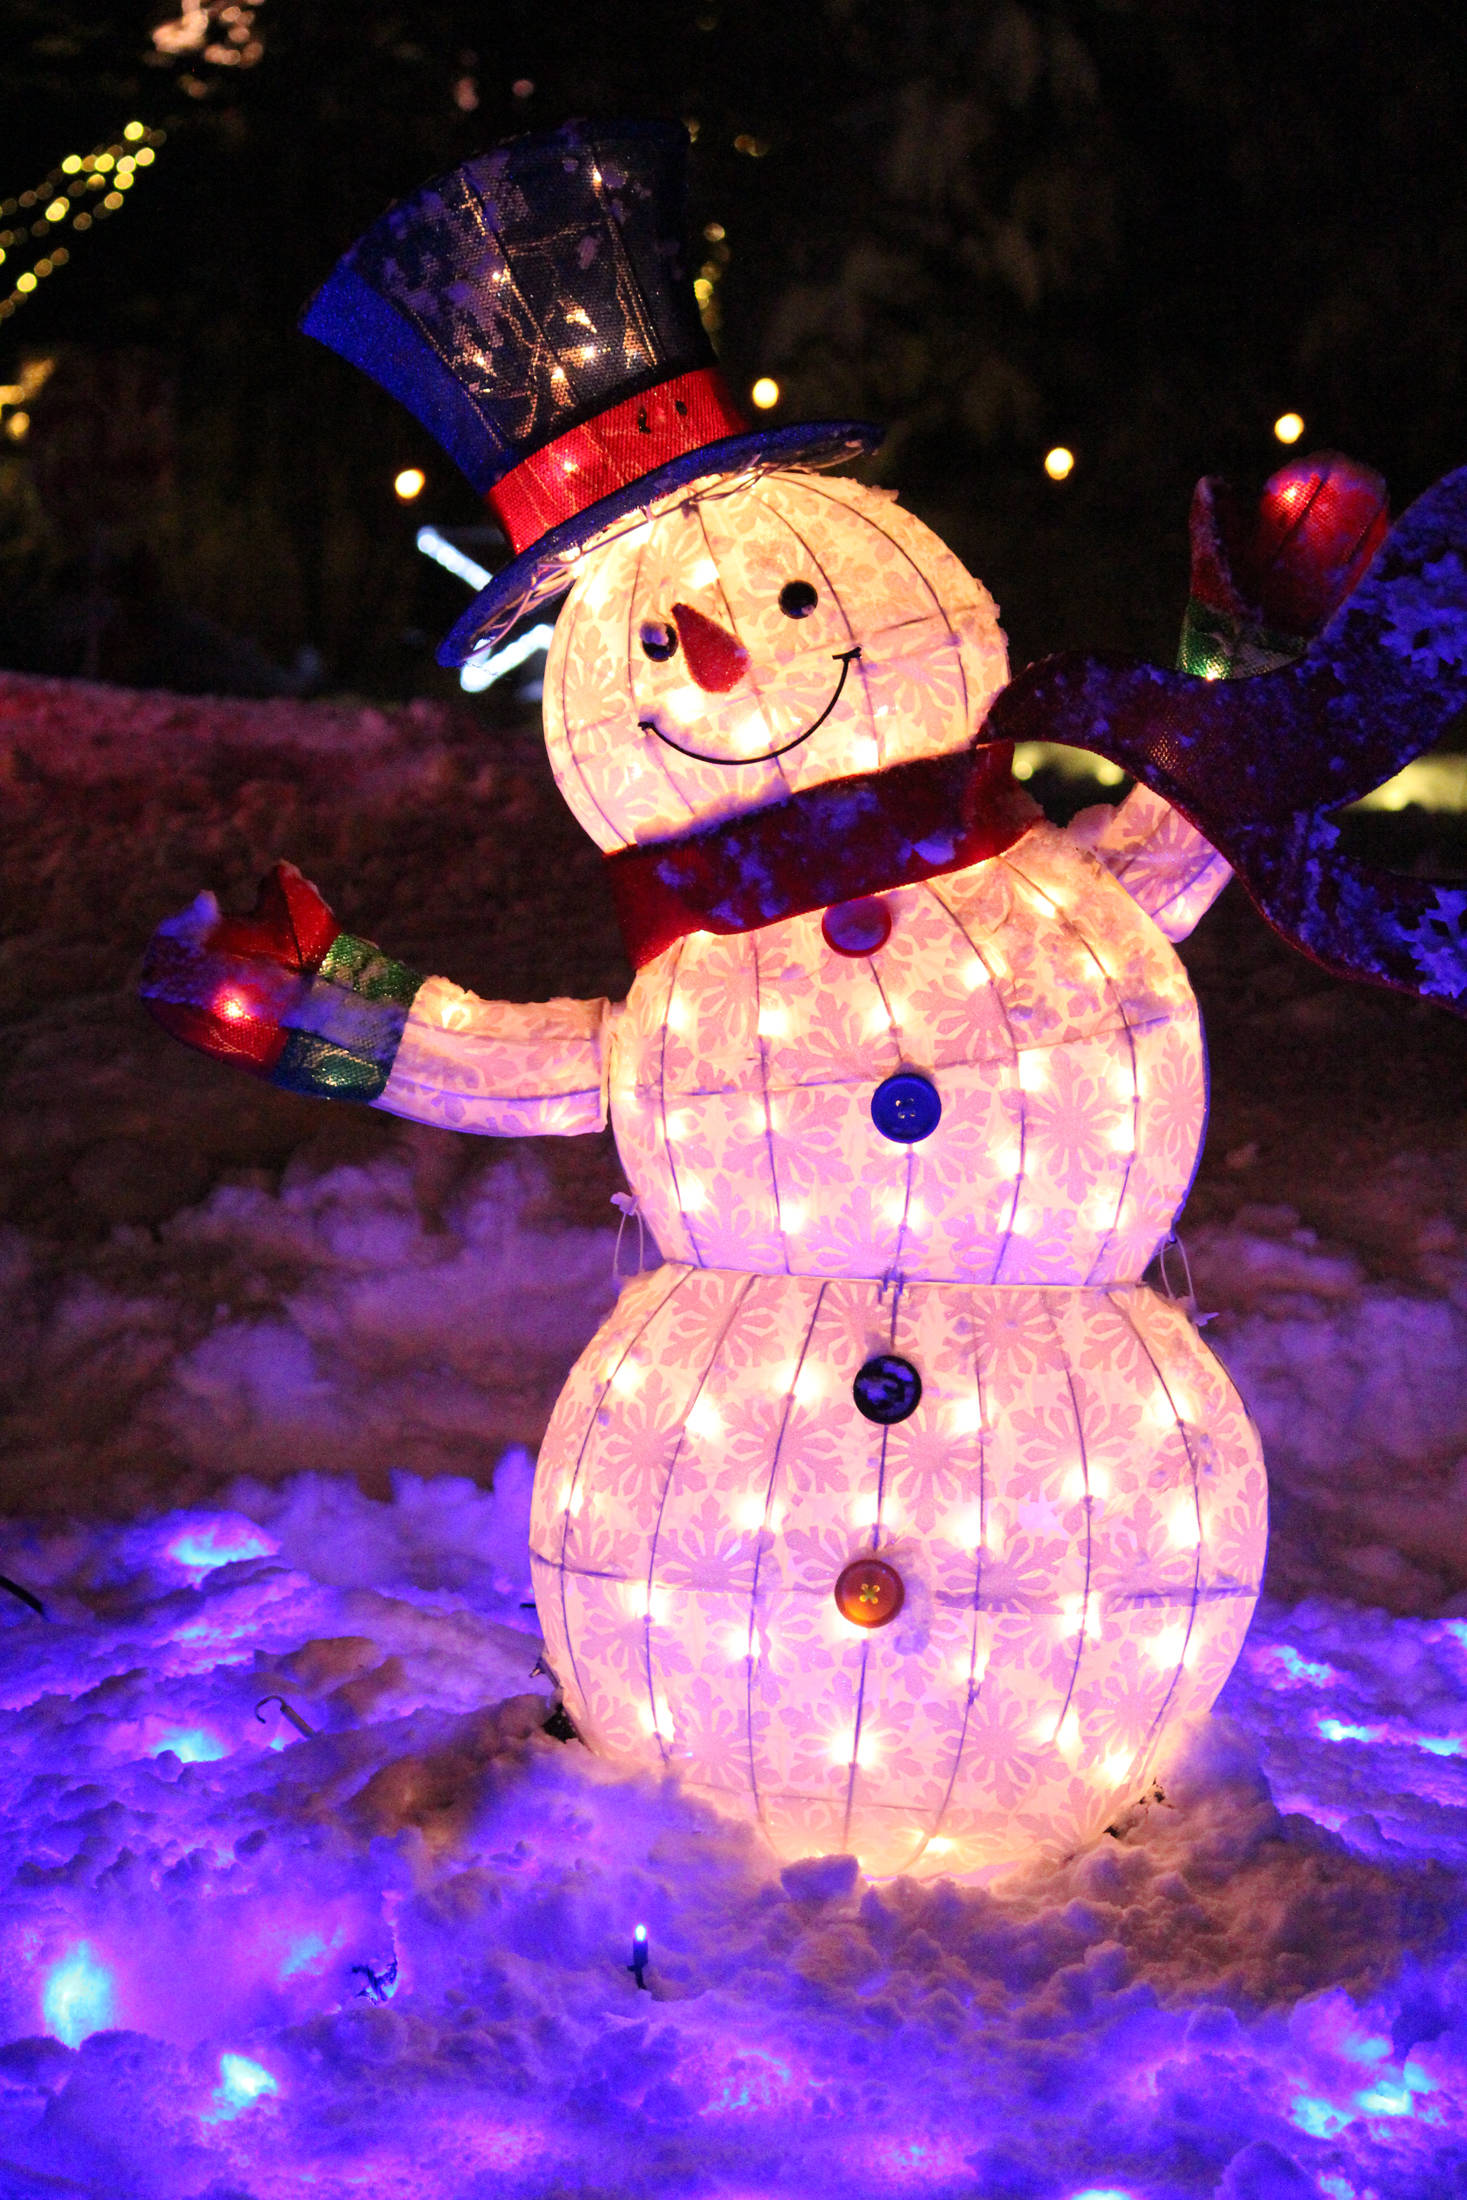 A lit up snowman waves and smiles at people as they walk by Saturday, Dec. 15, 2018 at the Bear Creek Winery Garden of Lights in Kachemak City, Alaska. (Photo by Megan Pacer/Homer News)